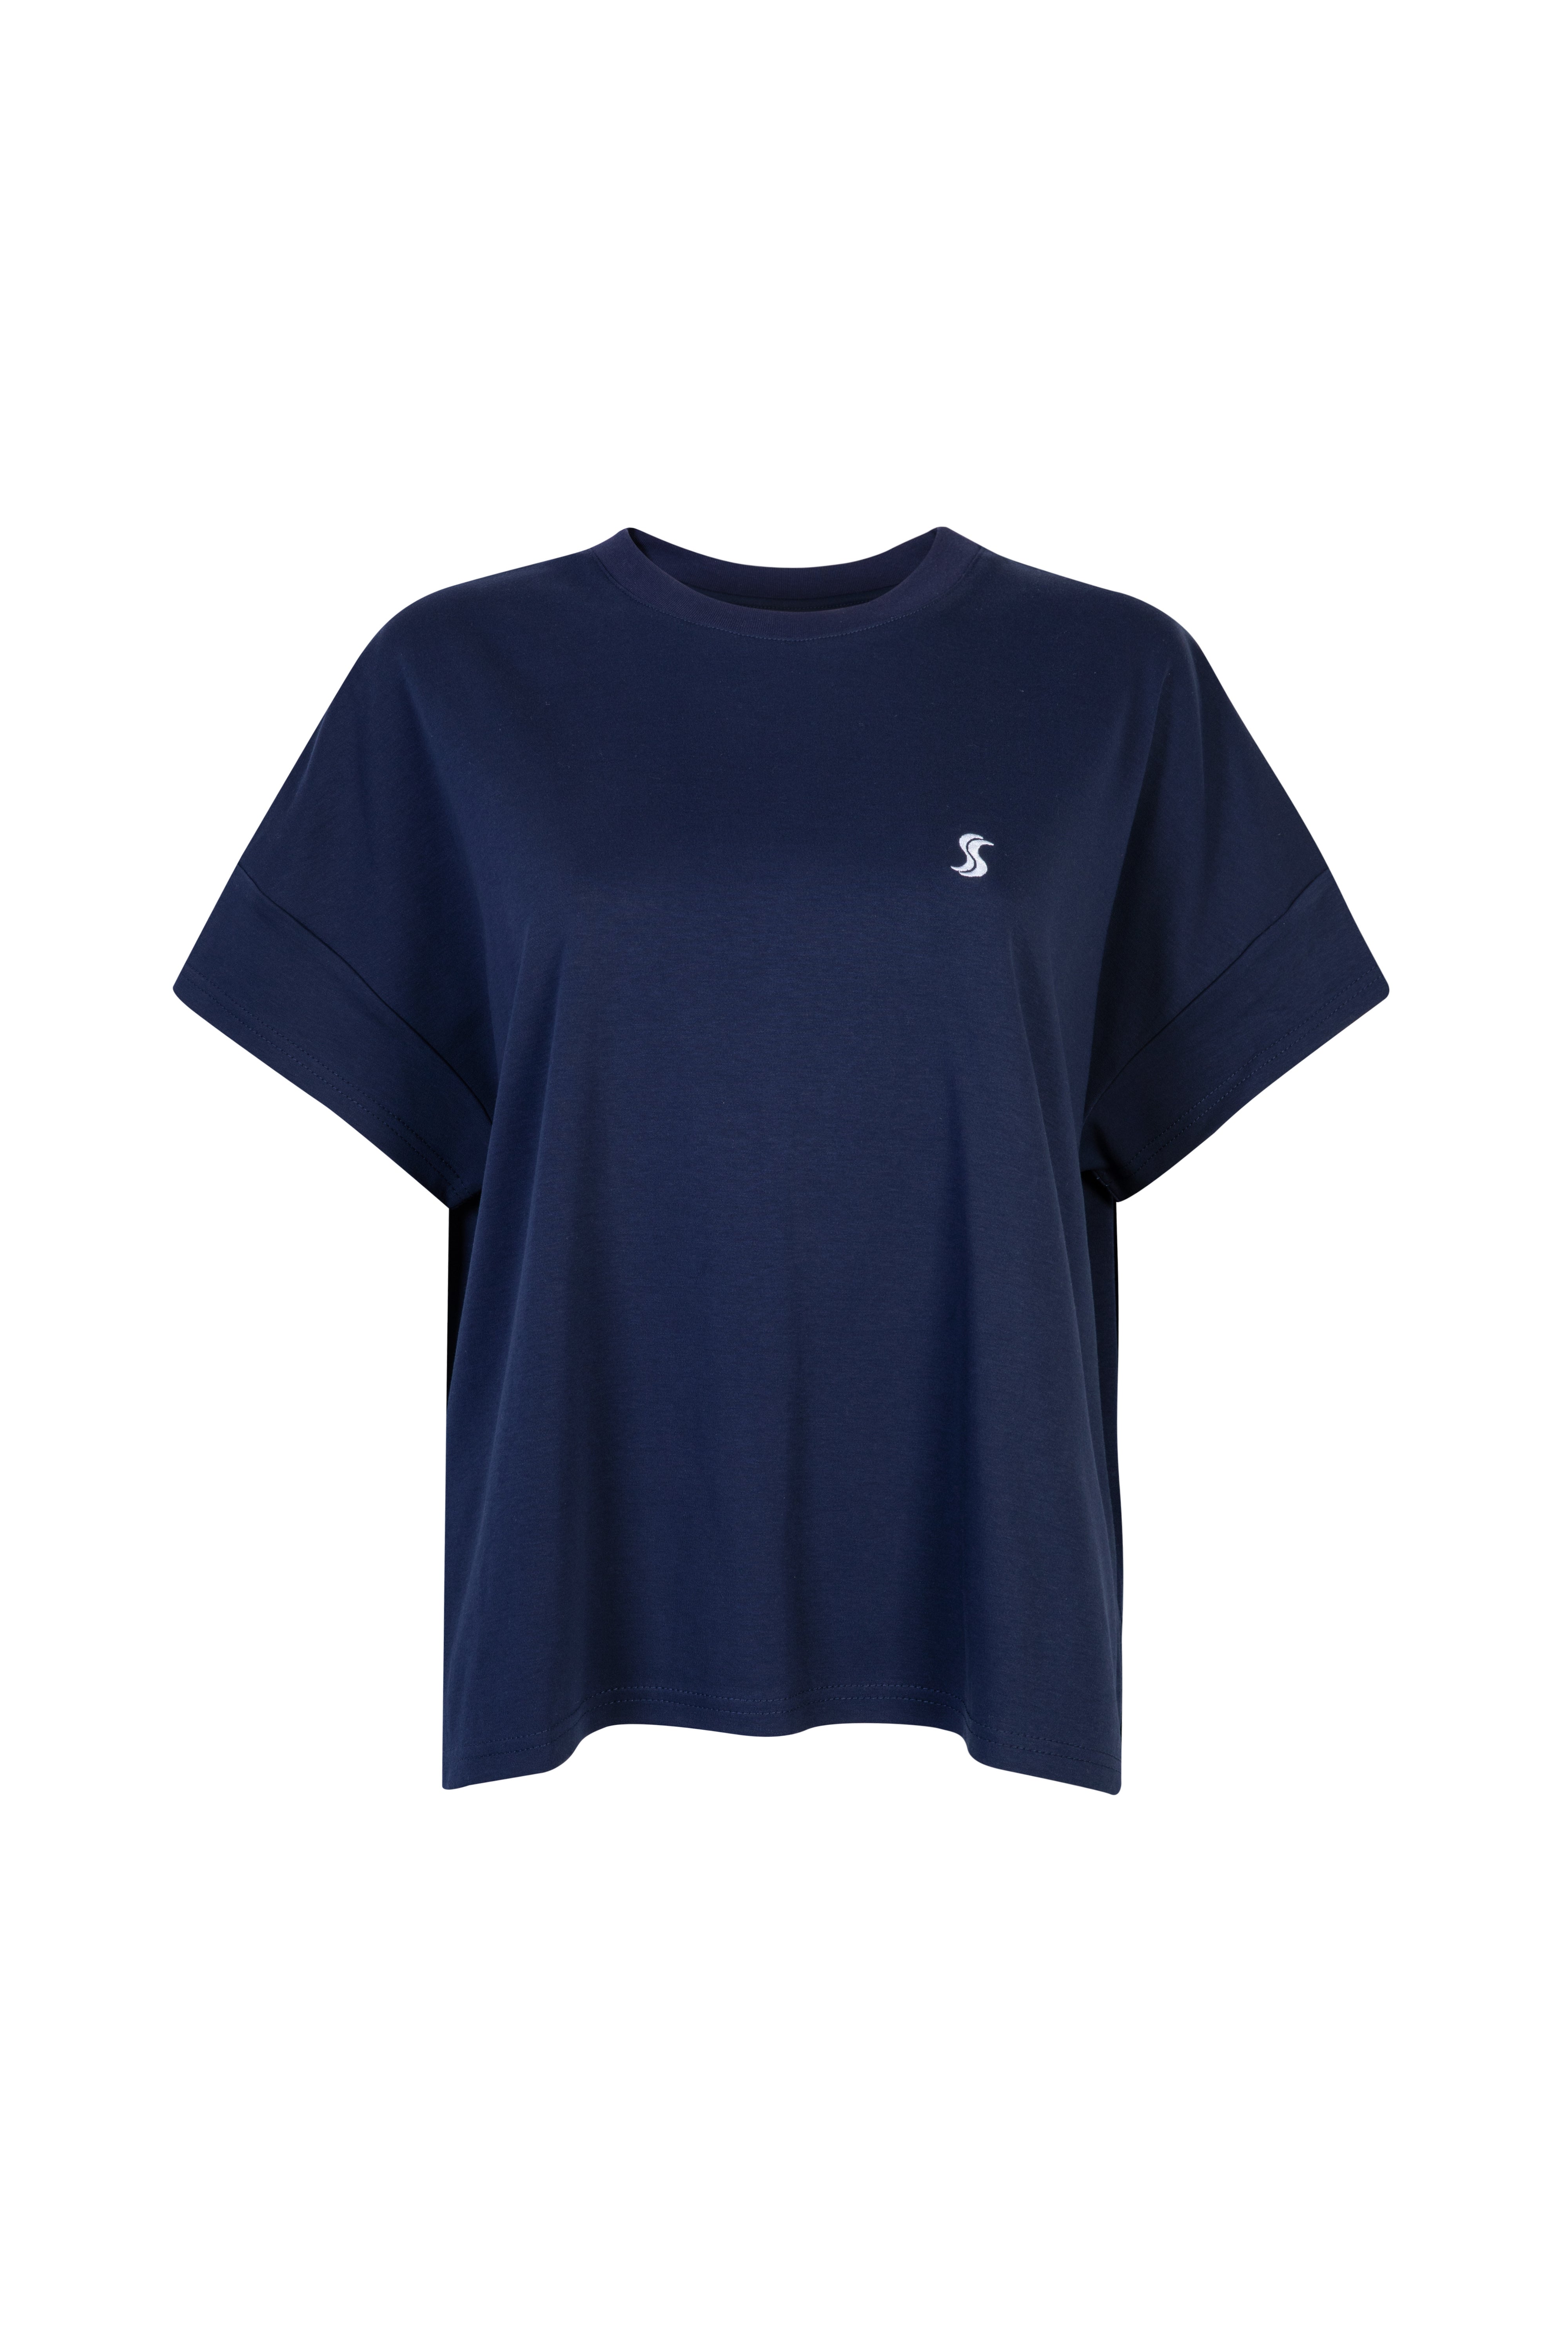 'SS' SIGNATURE EMBROIDERED T SHIRT - NAVY